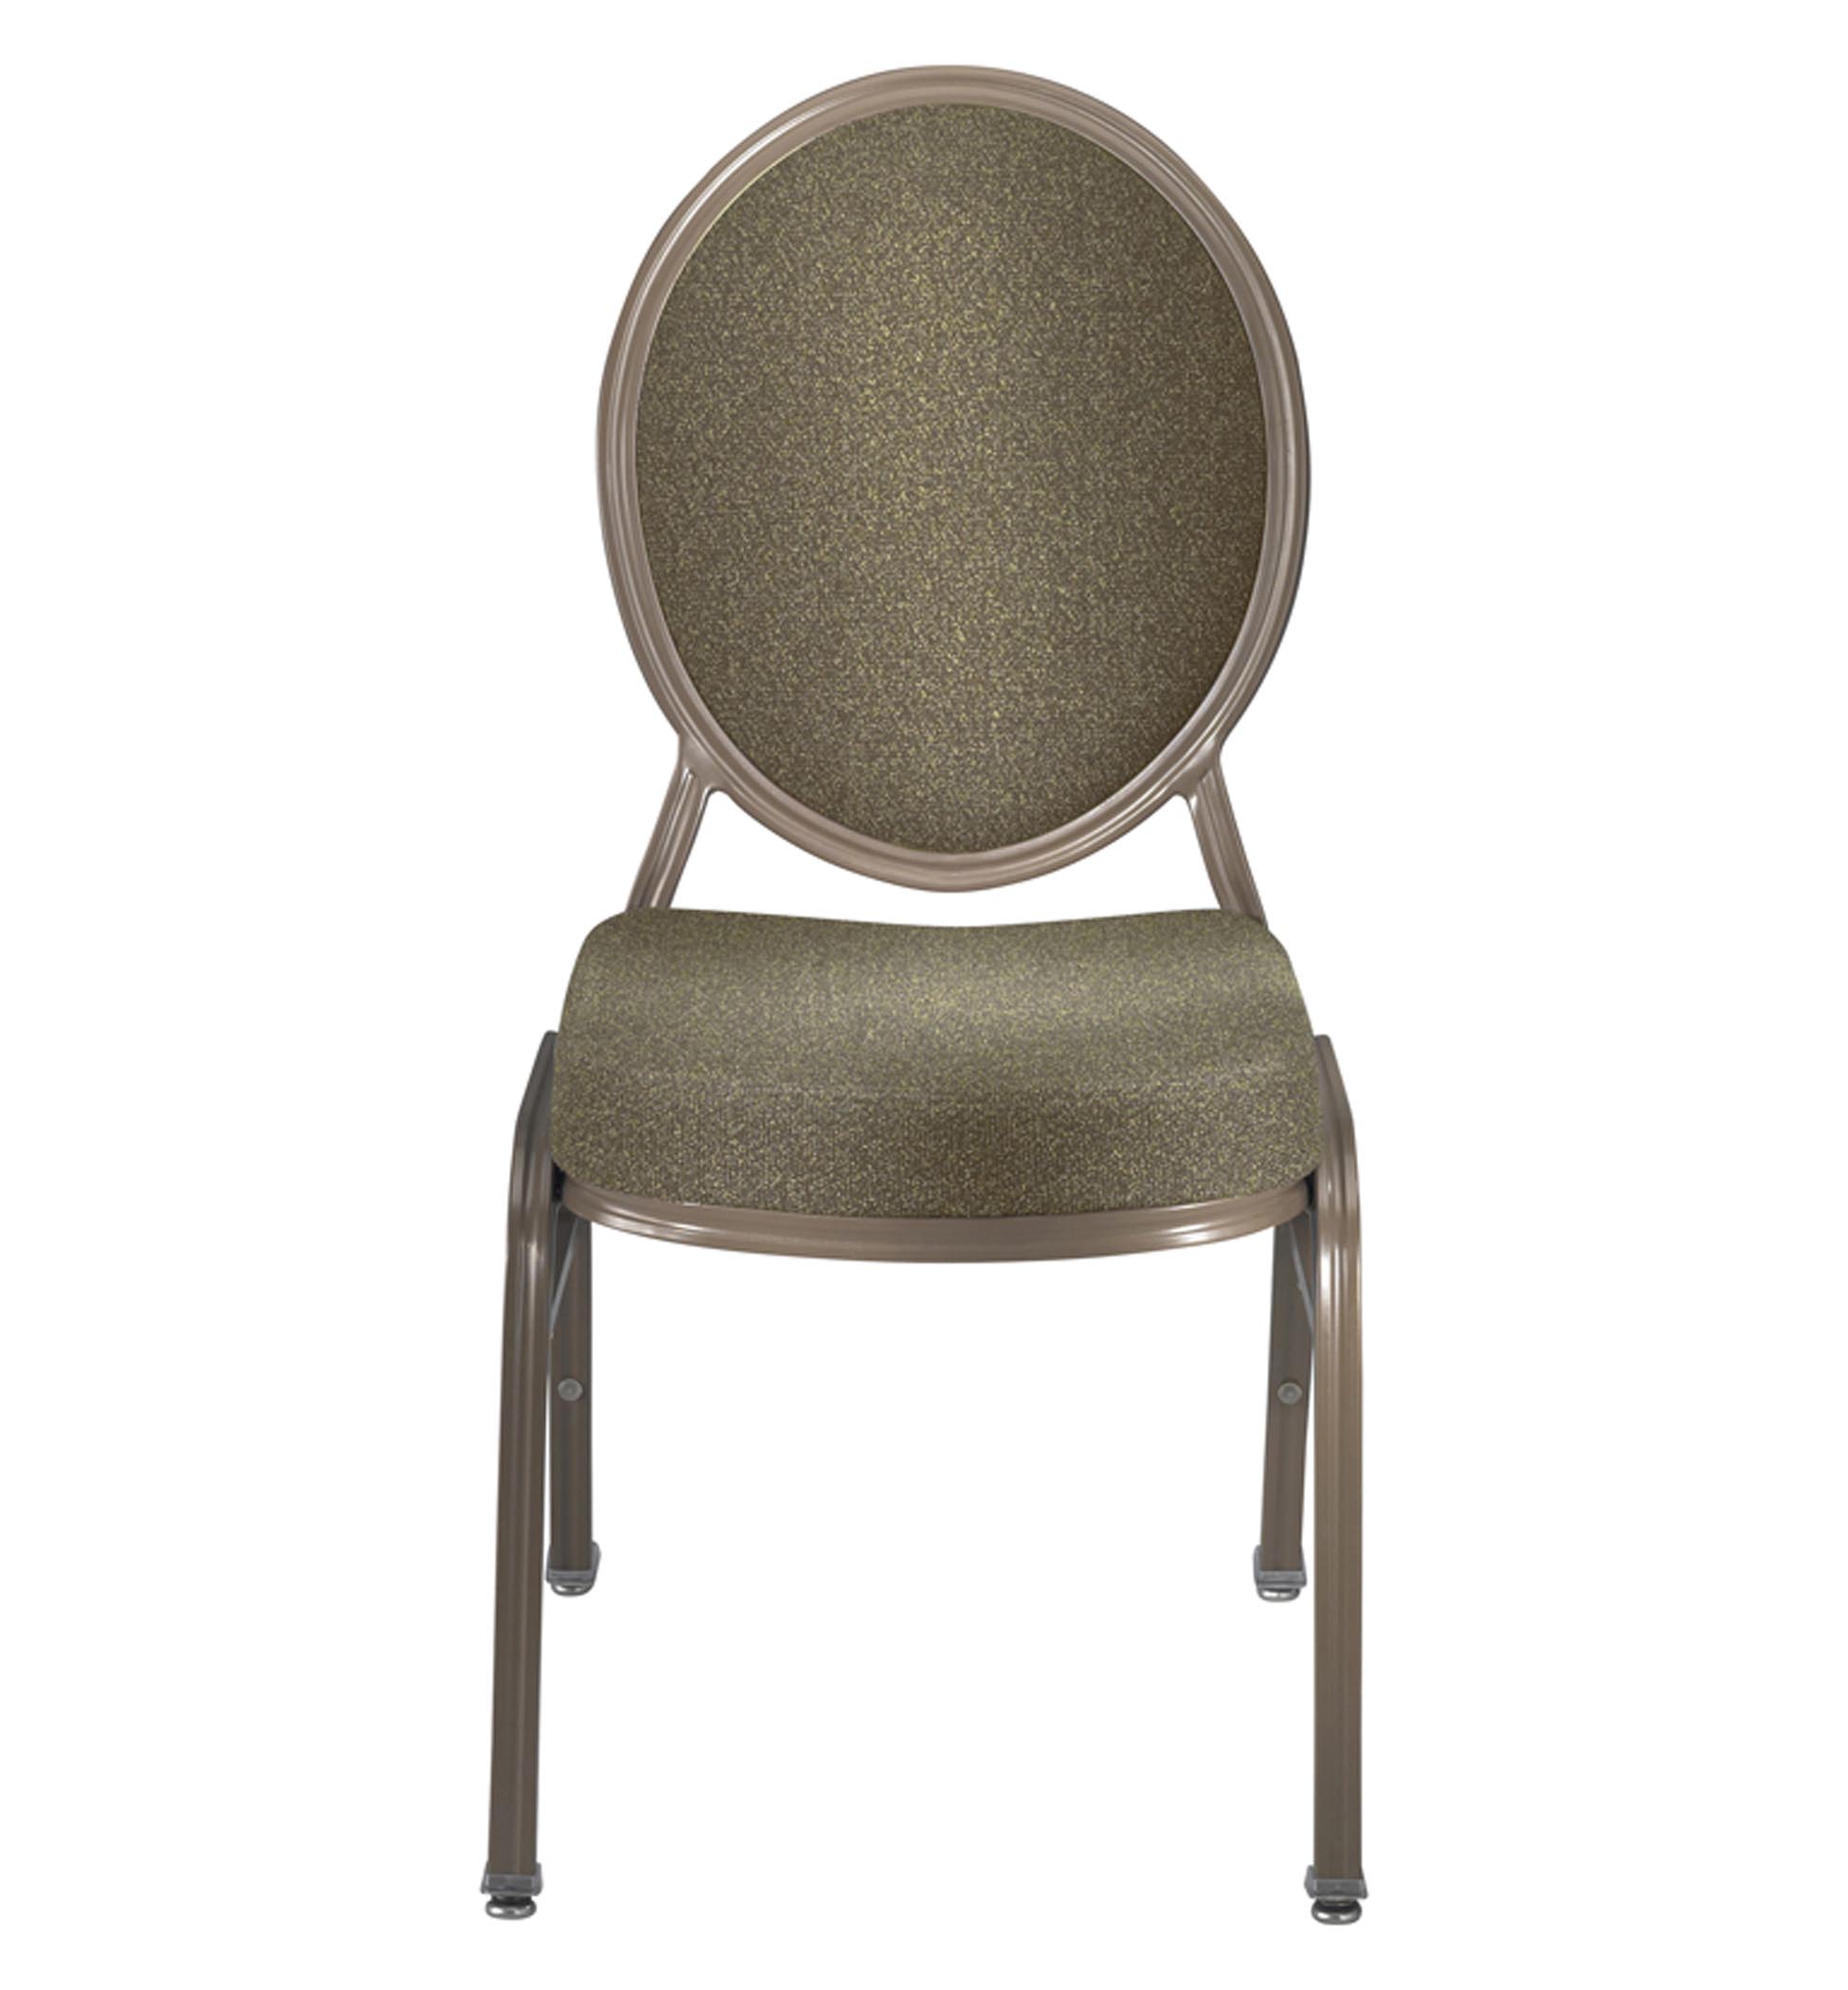 8551 / 8551-AB Aluminum Stacking Banquet Chair